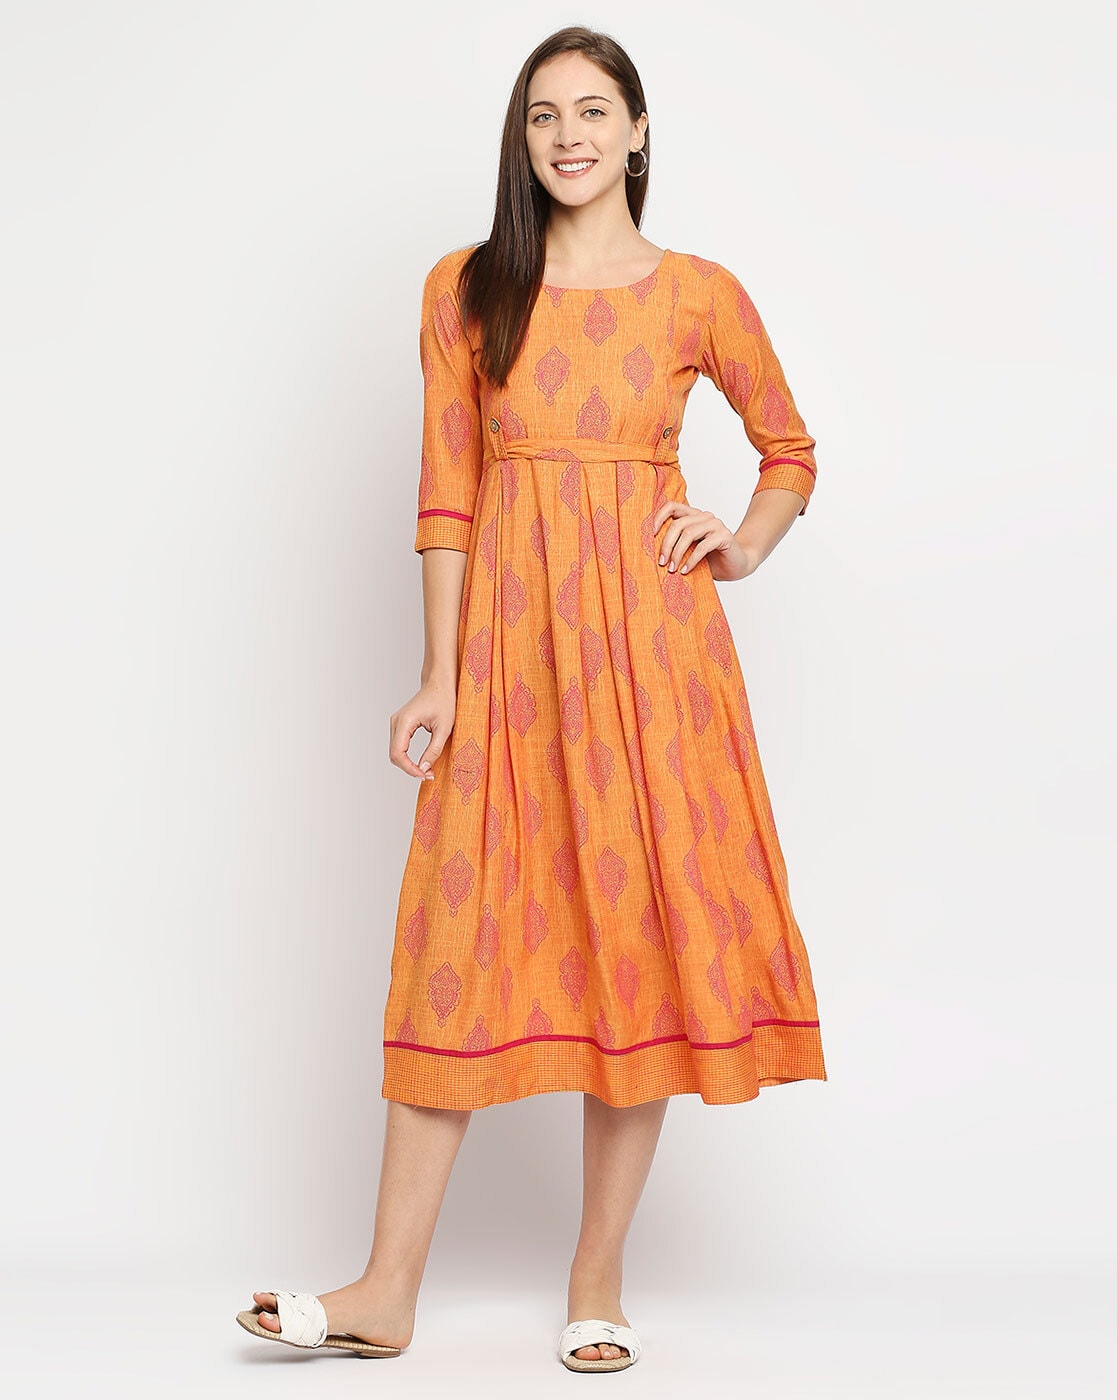 Exploit Flipkart to the Fullest  Find Yourself the Perfect Kurti 2019  From the Online Shopping Portal